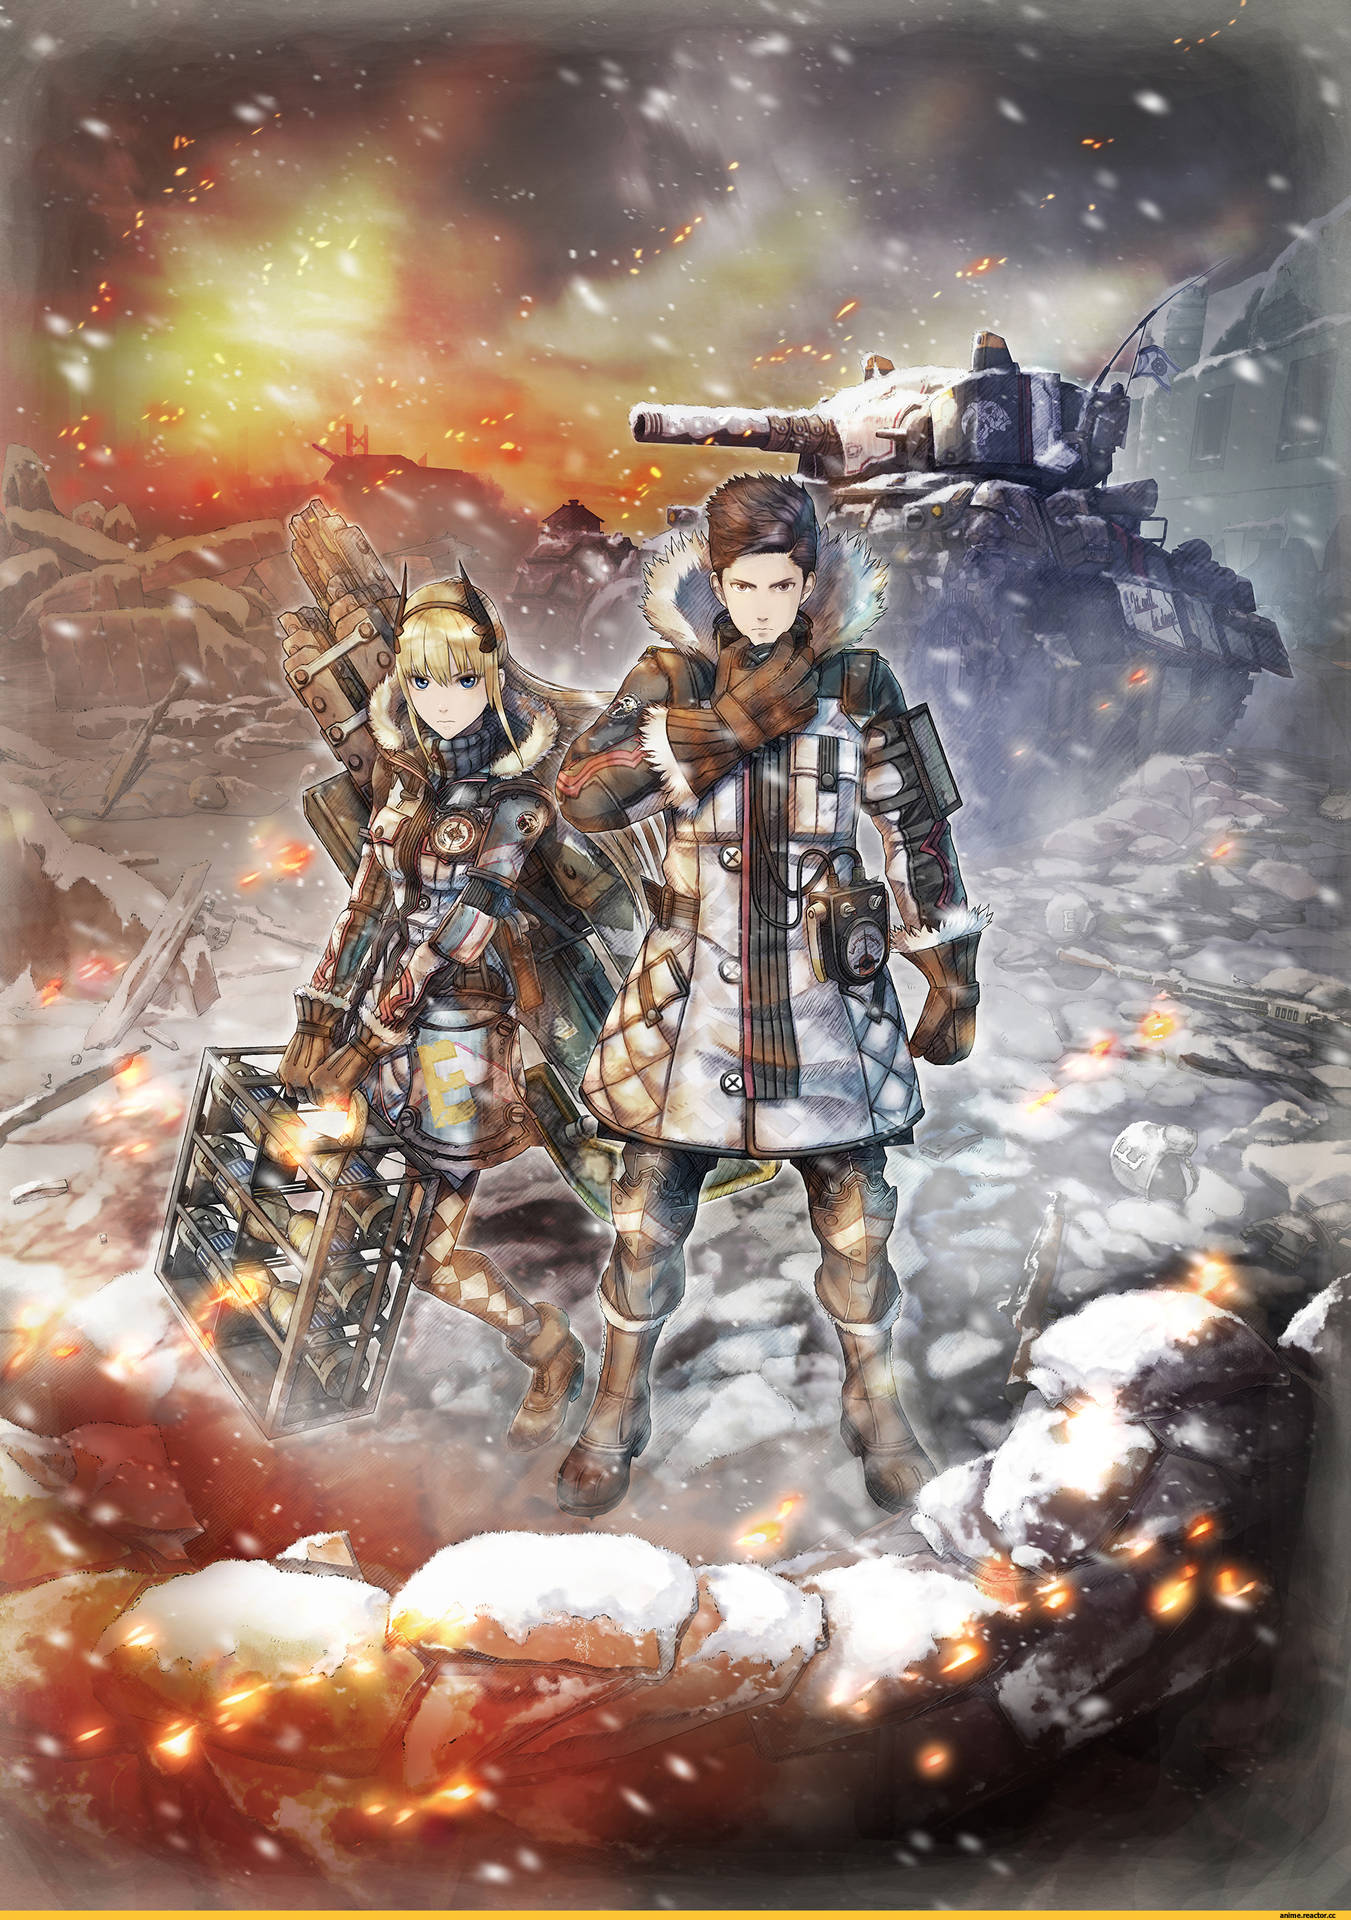 Valkyria Chronicles Protagonists - Claude and Riley Wallpaper